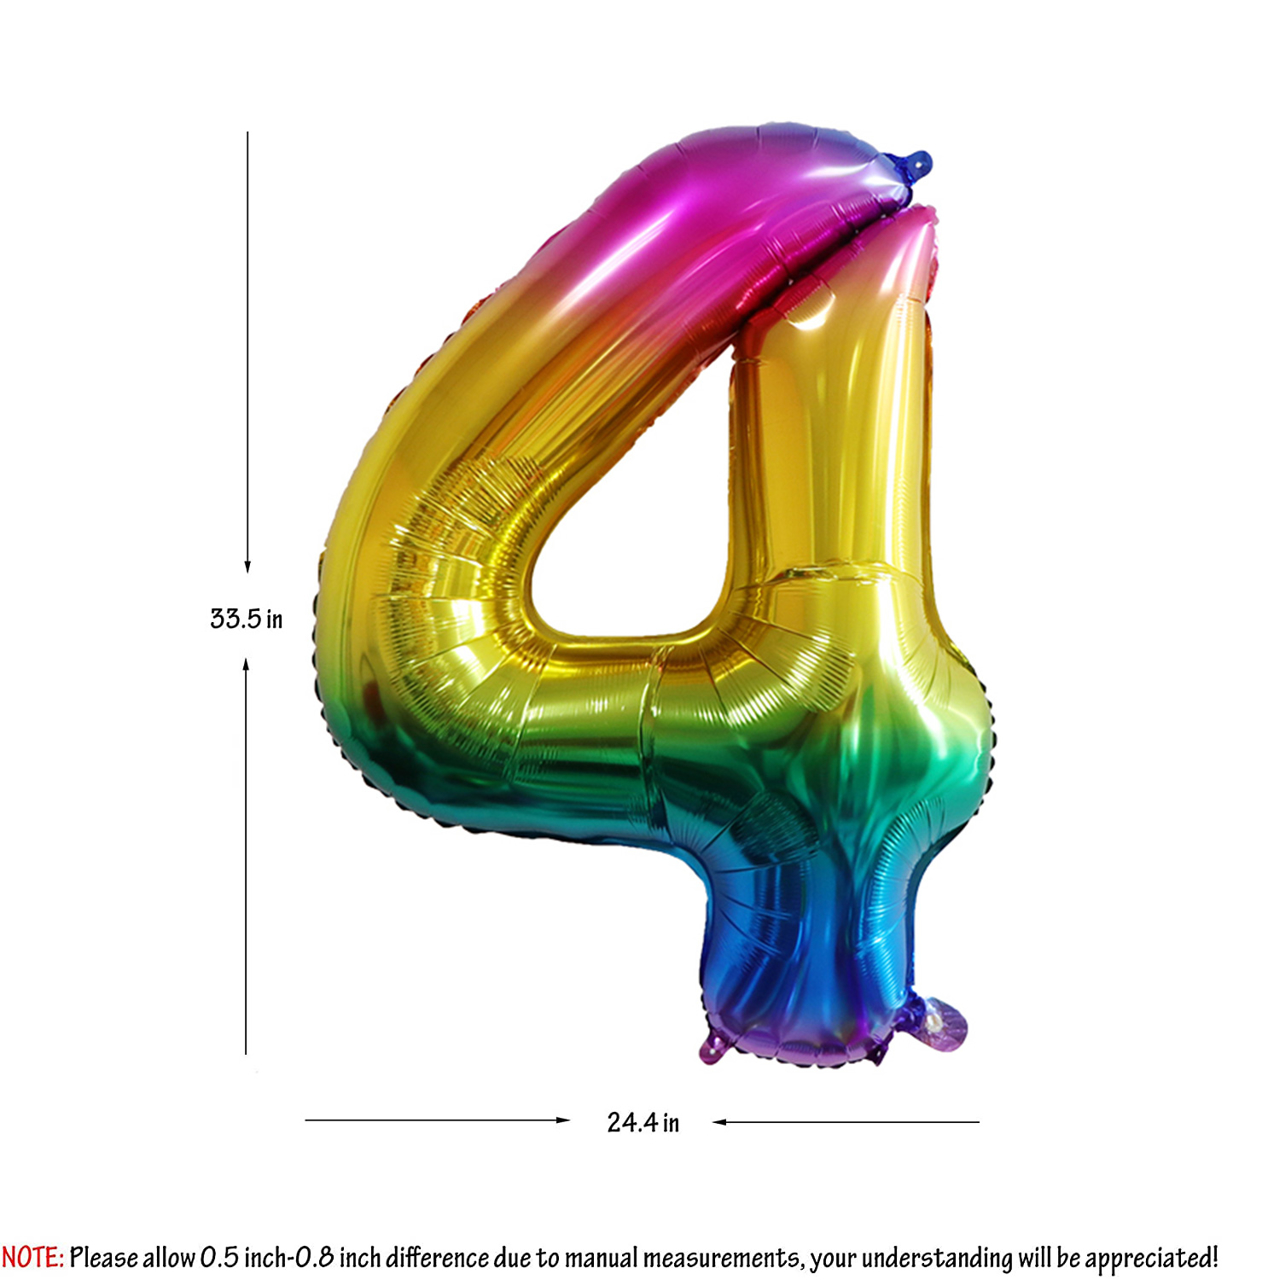 Picture of 40'' Foil Balloon Shape Number 4 - Bright Rainbow (1pc)